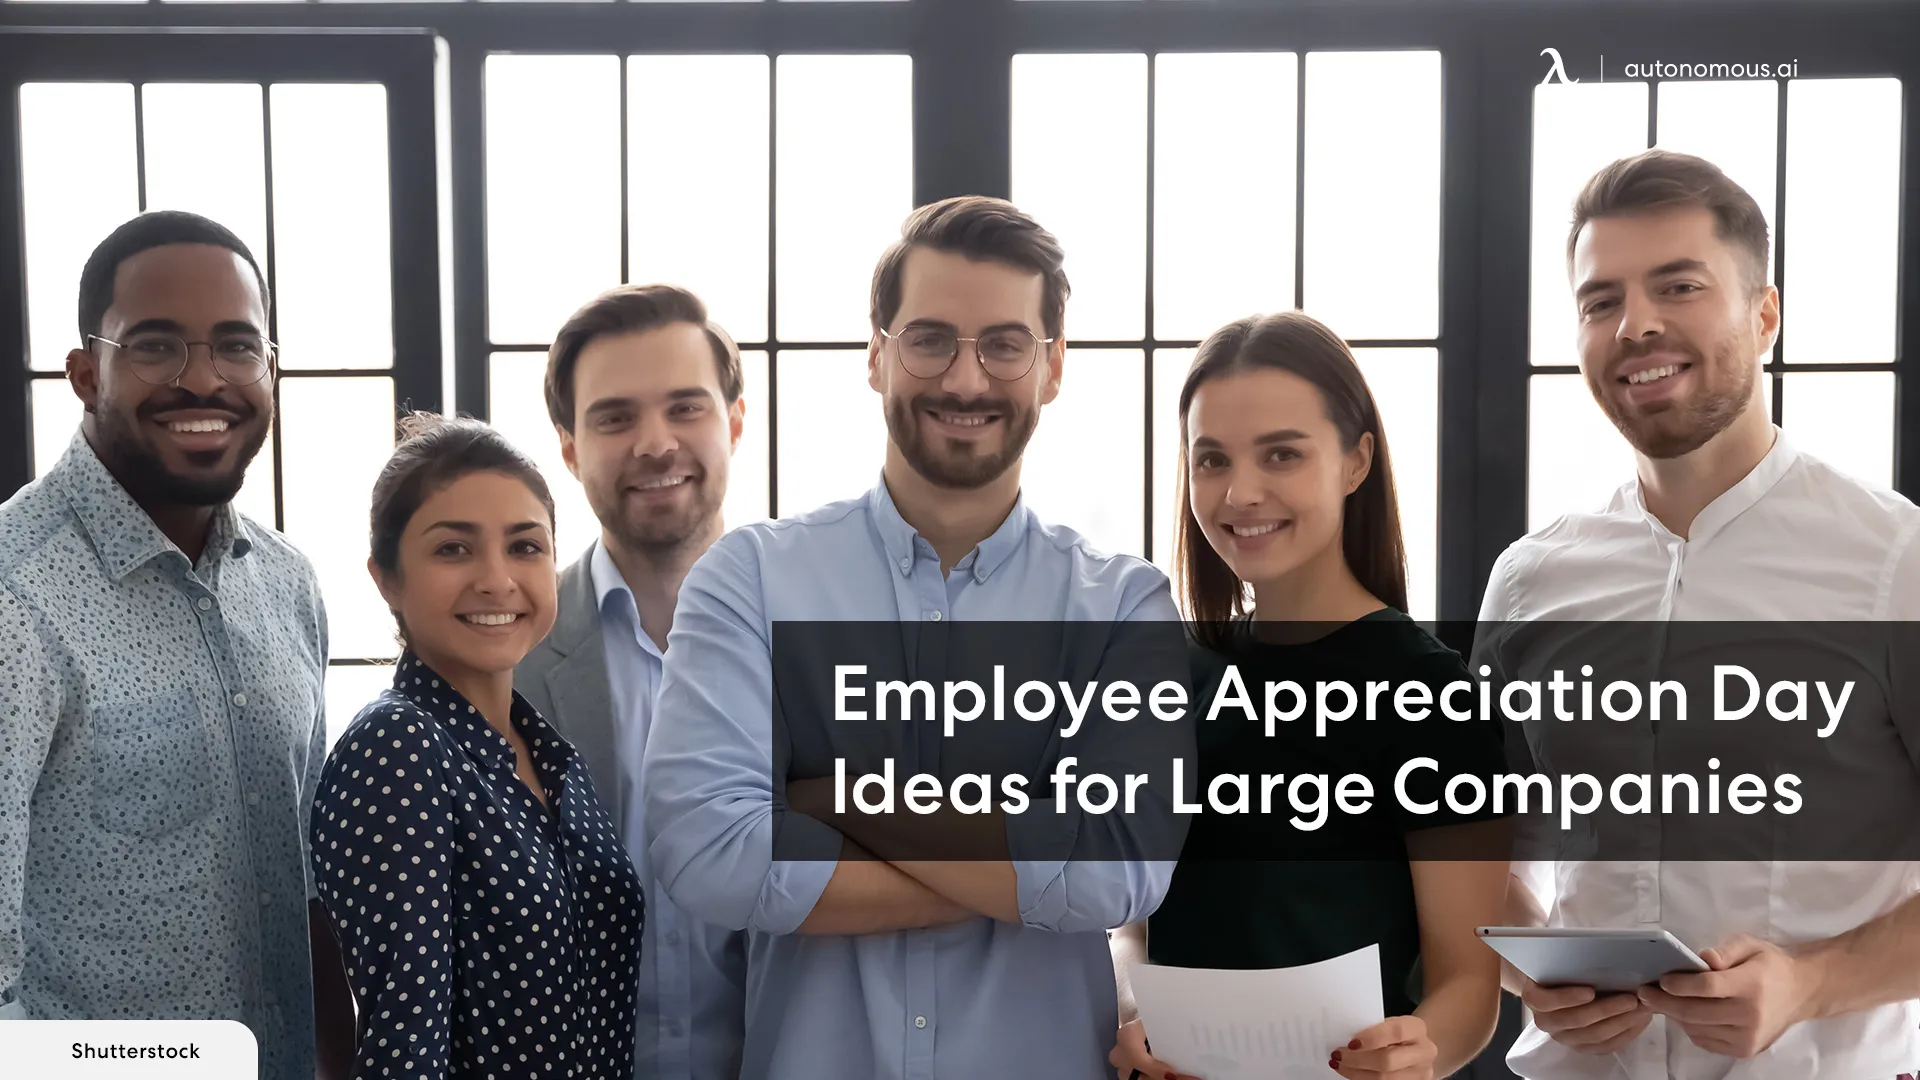 Employee Appreciation Day Ideas for Large Companies